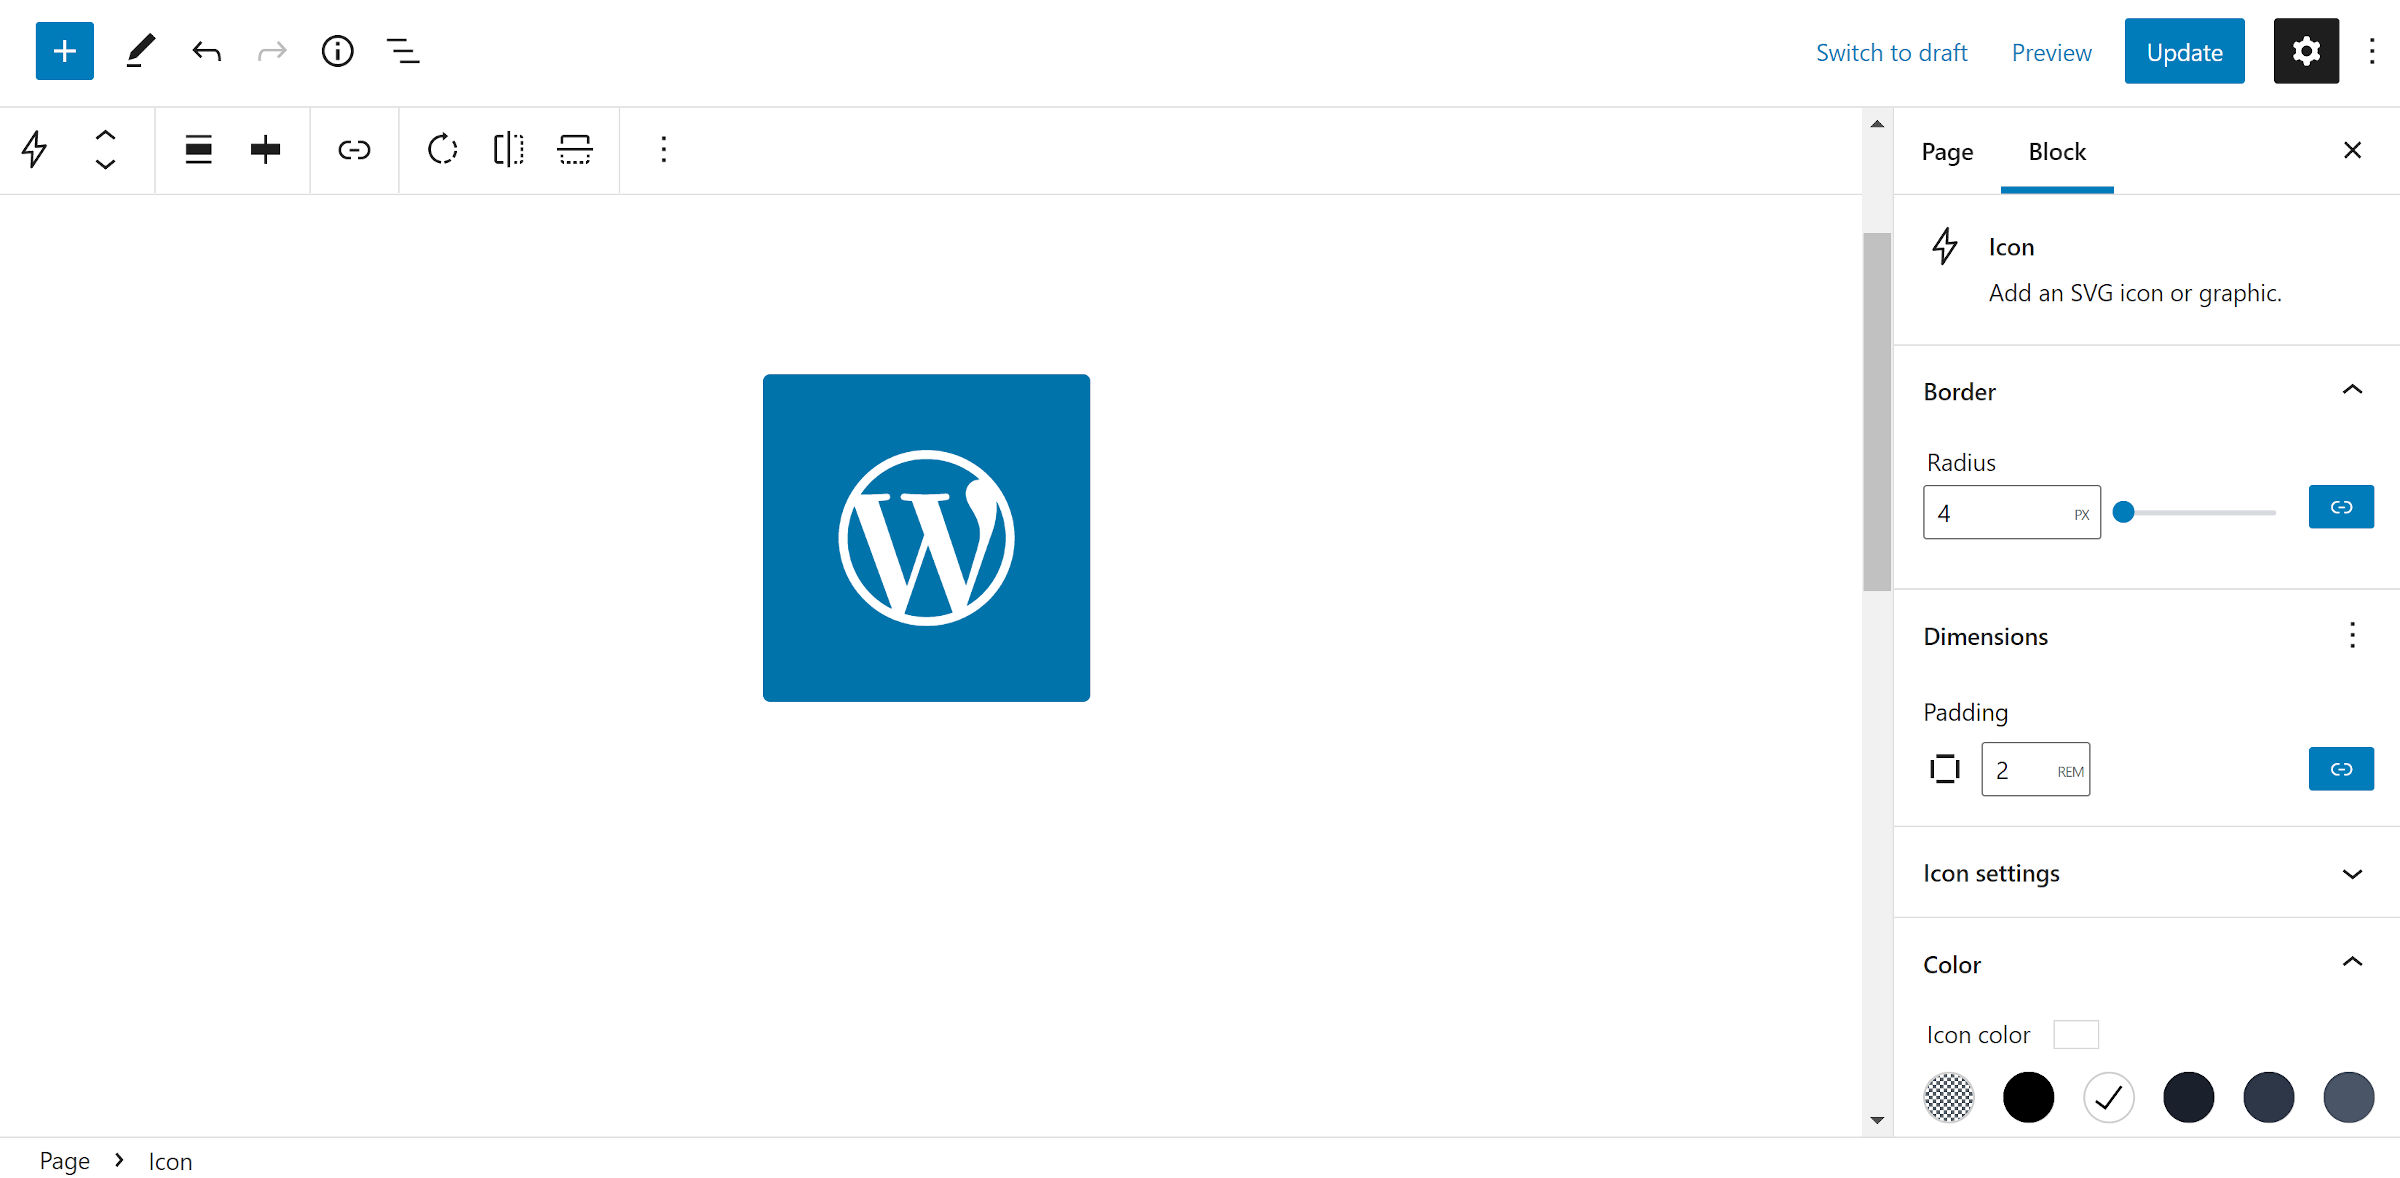 The WordPress logo as an icon with a blue background and white icon.